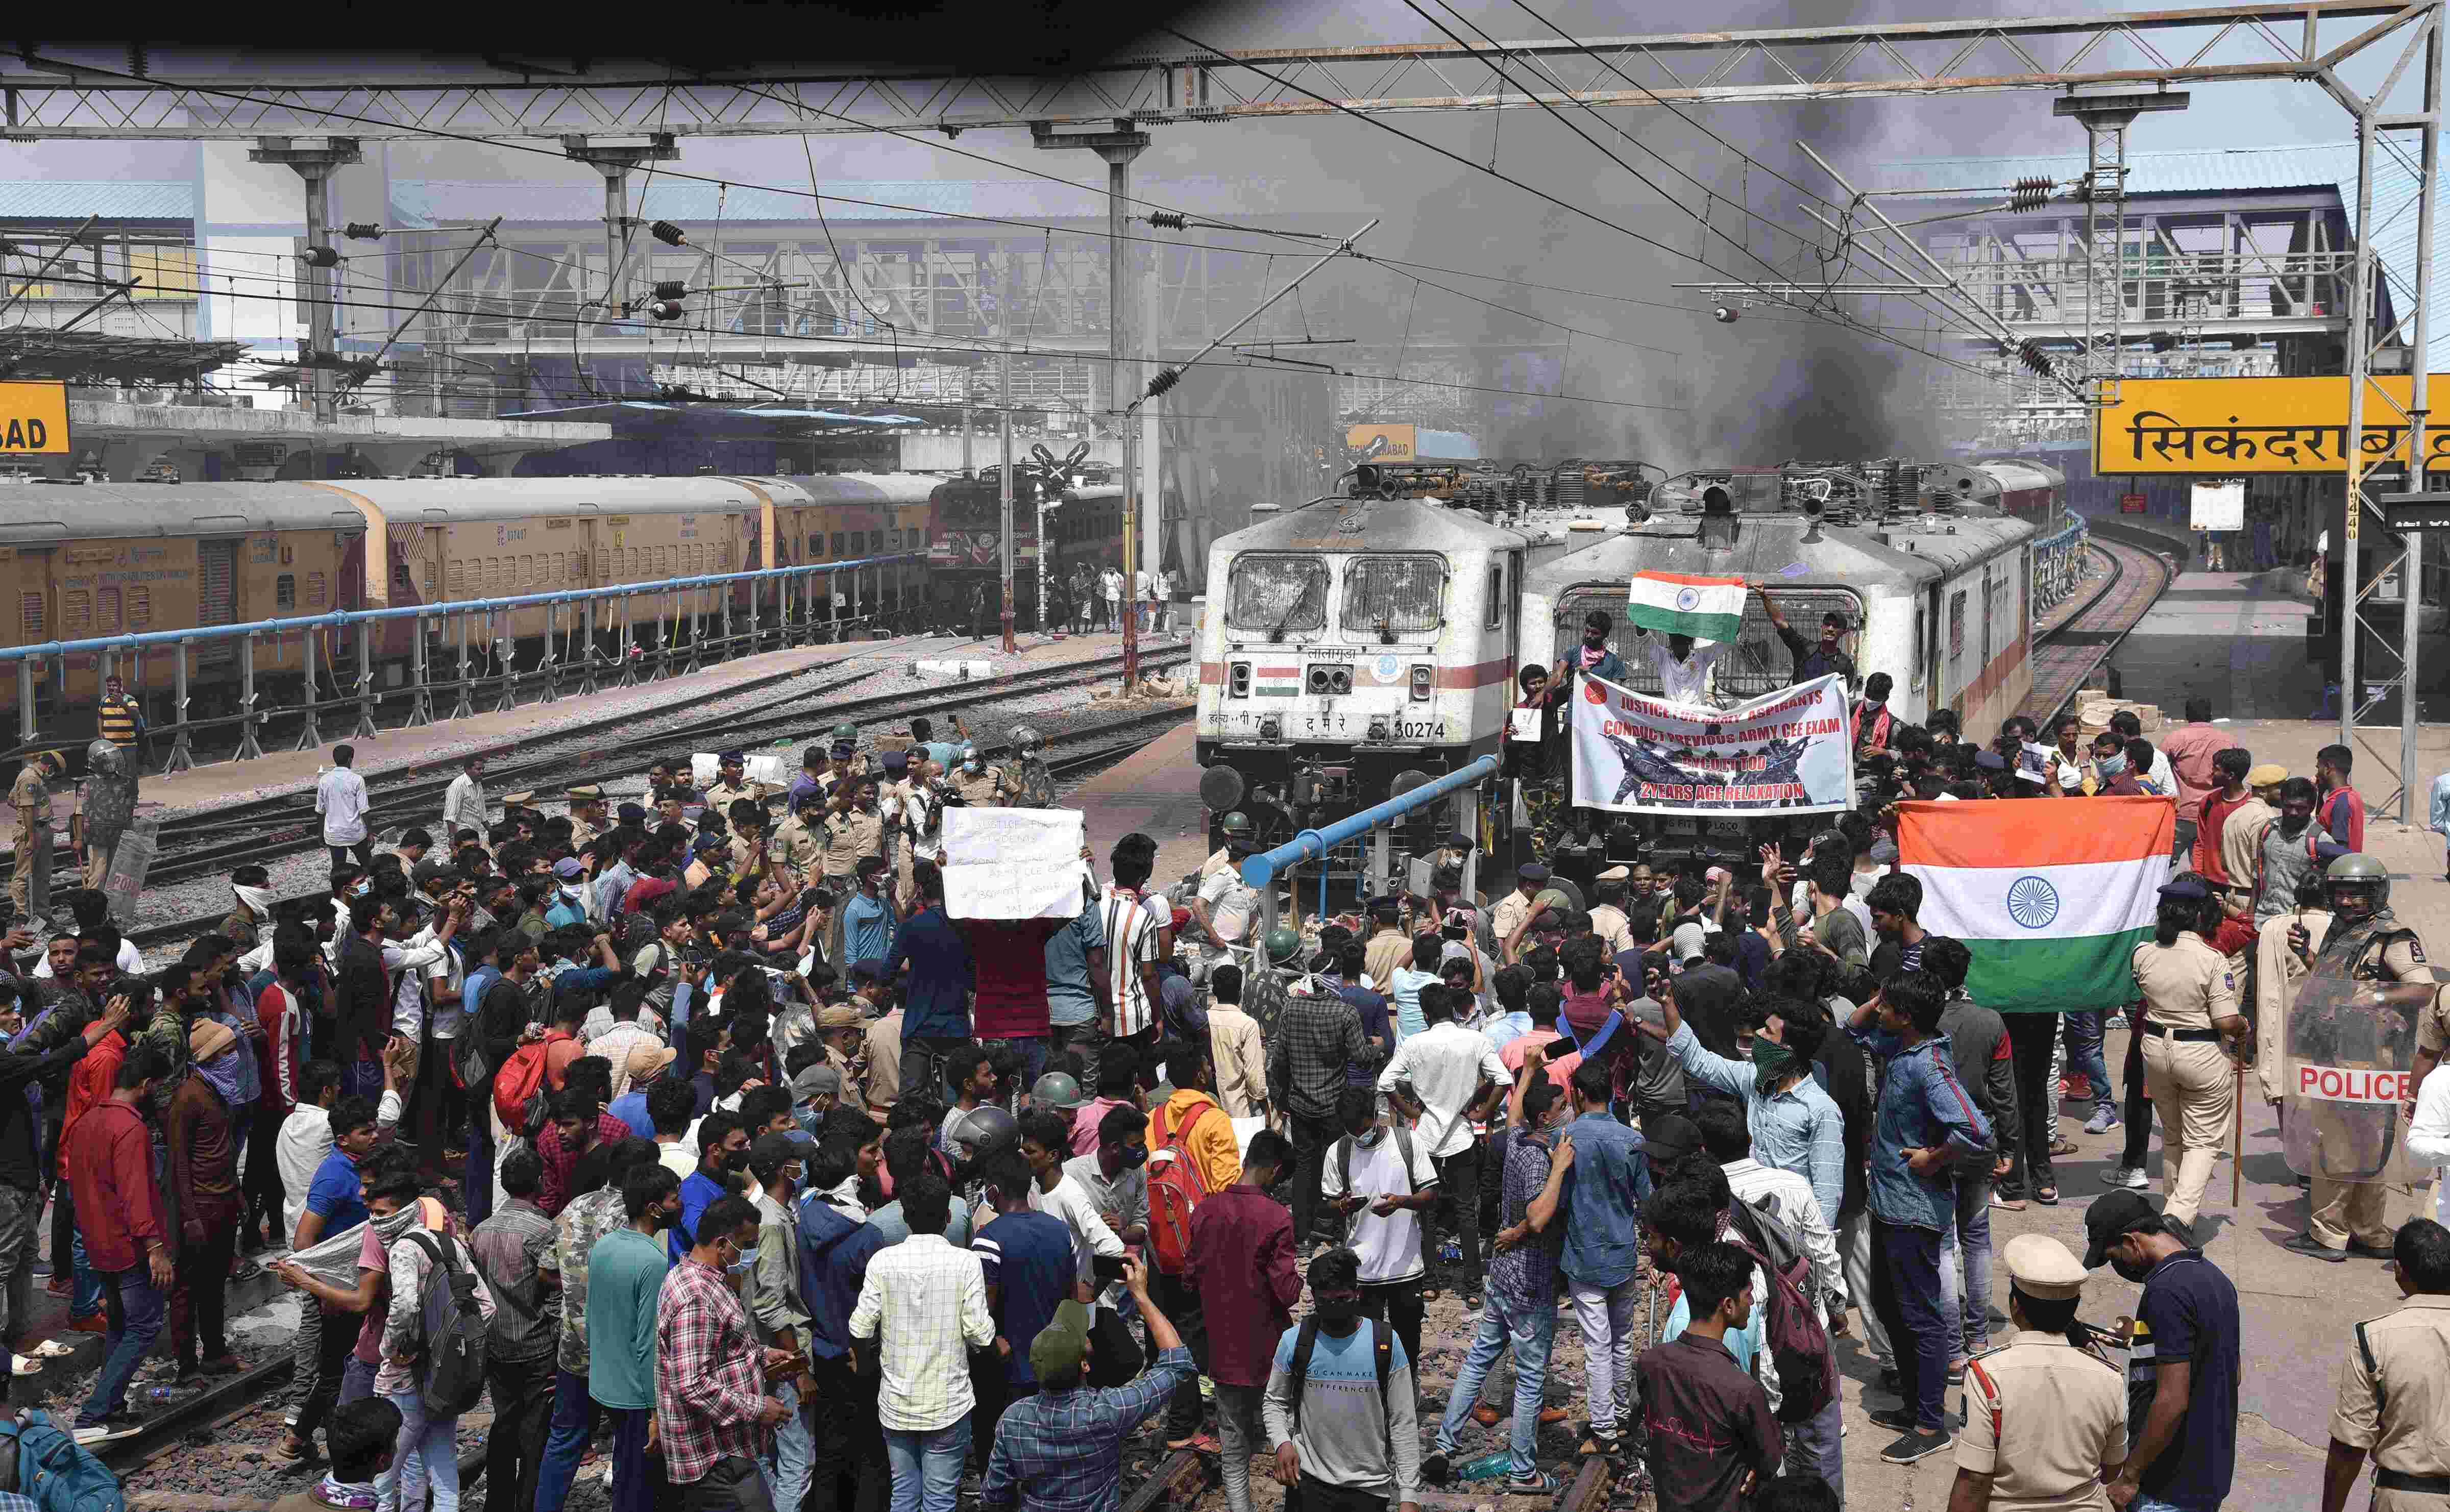 Violence-hit Secunderabad railway station under tight security cover, train services resume